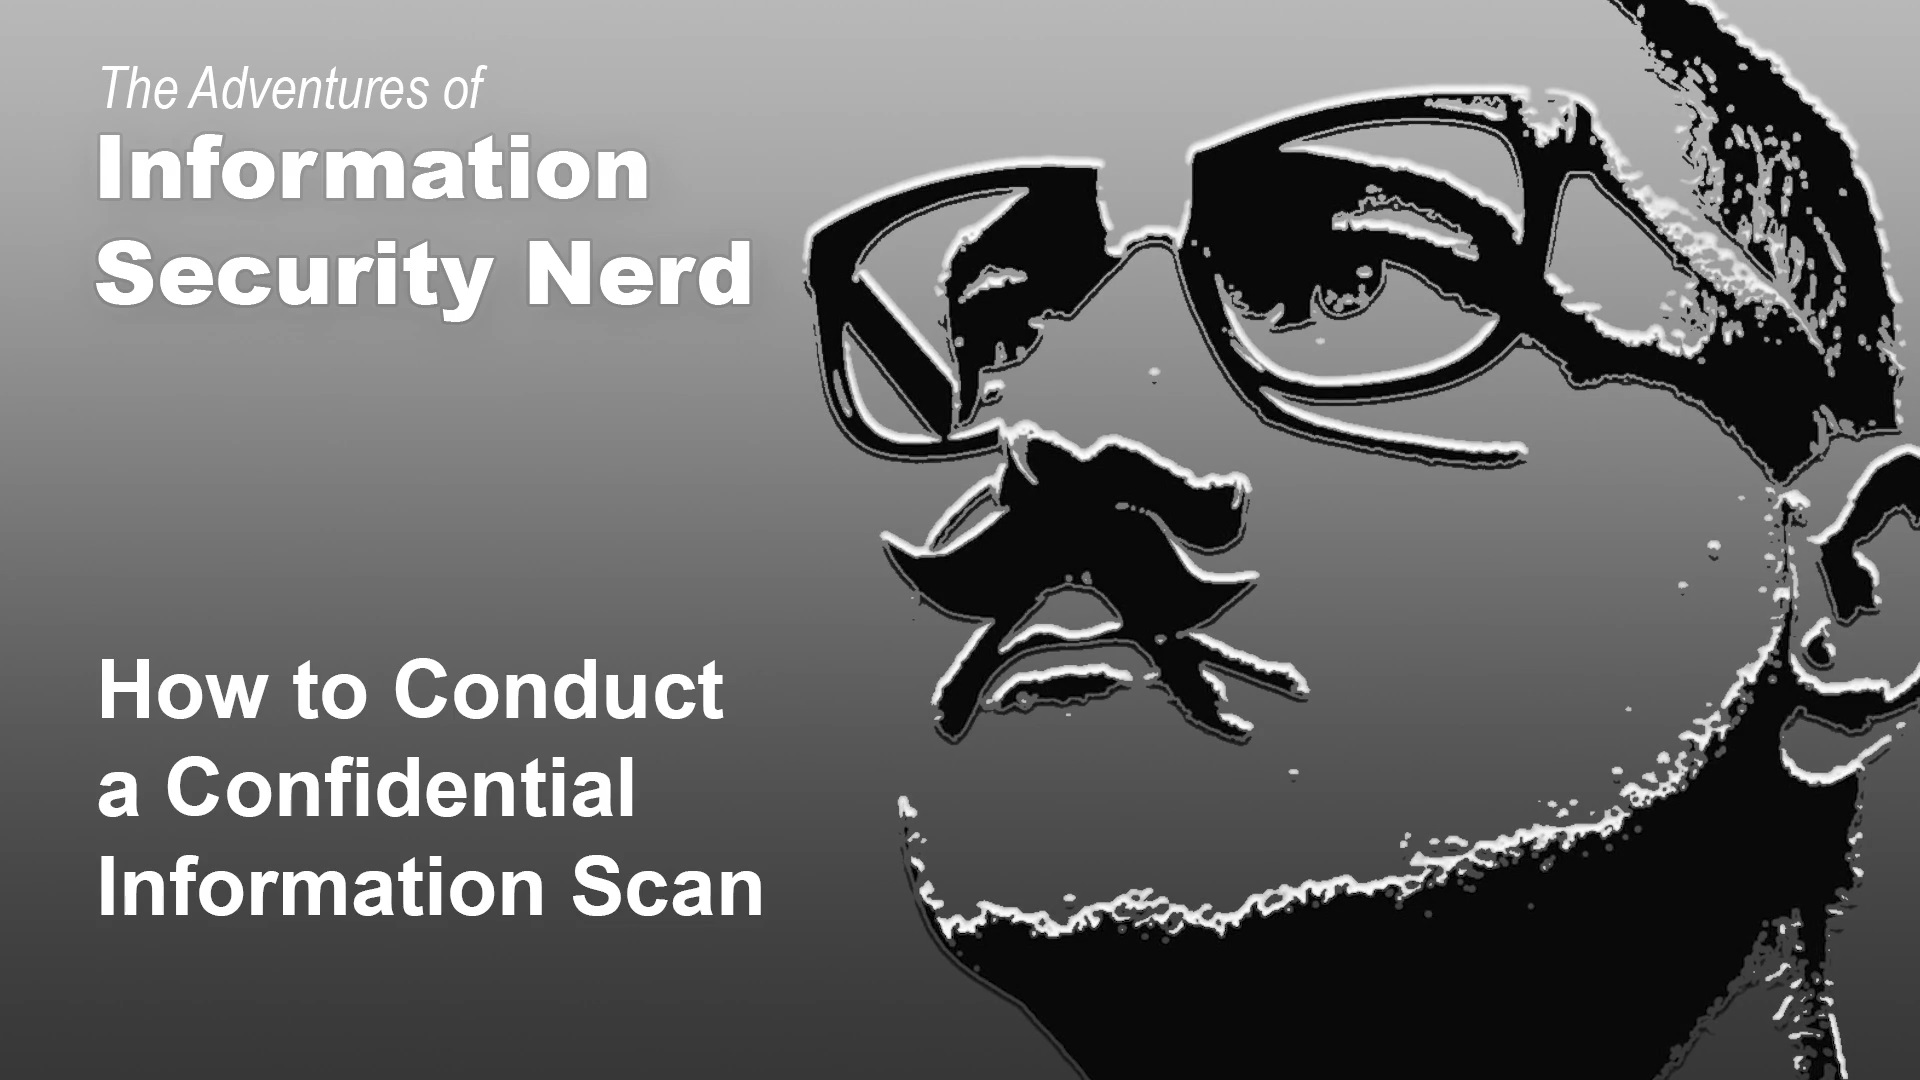 the adventures of information security nerd - how to conduct a confidential information scan